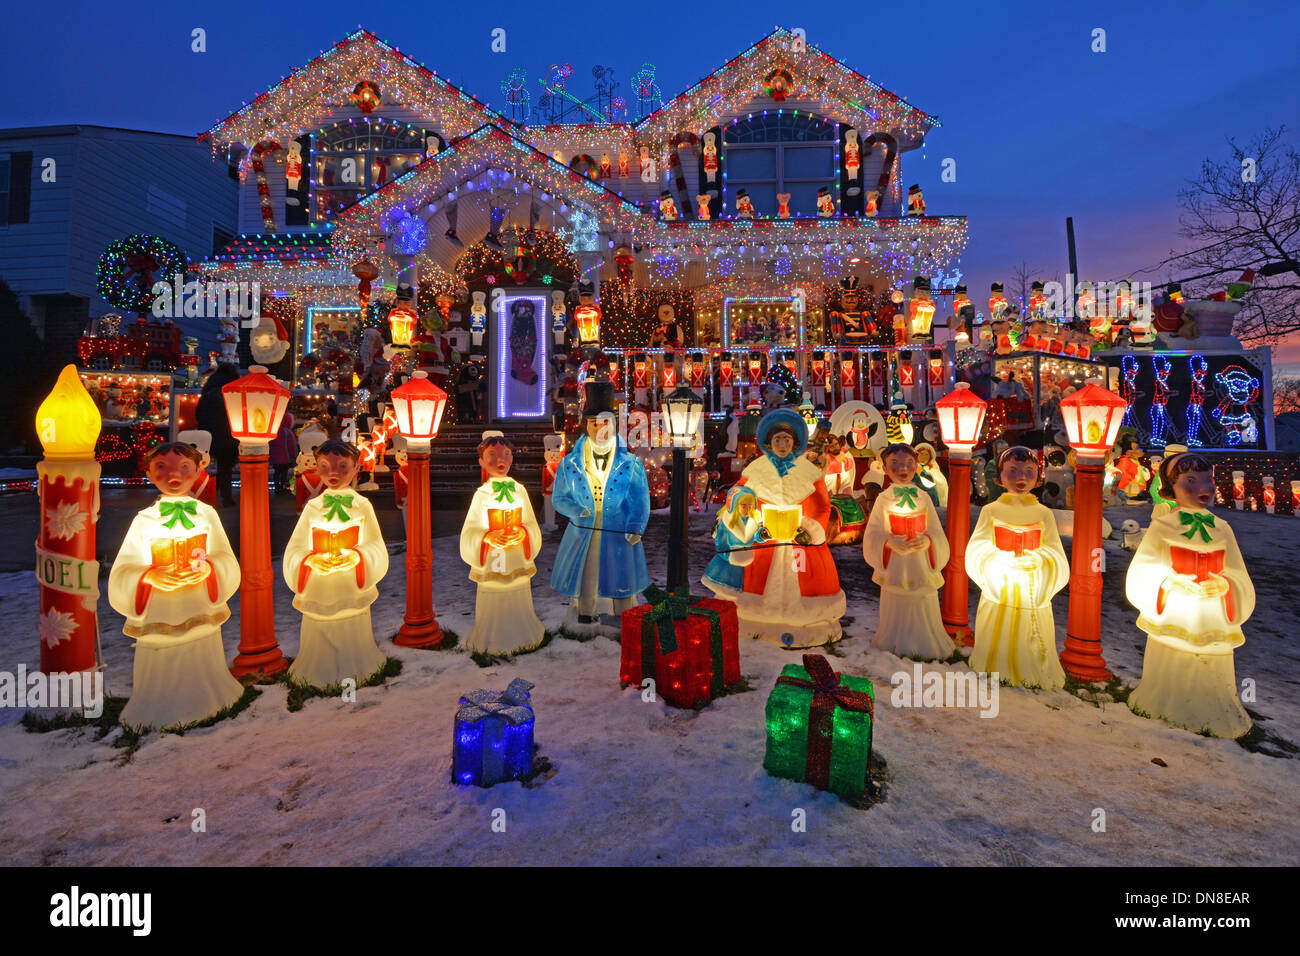 A house in Bayside, Queens, New York with elaborate lighting for Christmas. Stock Photo